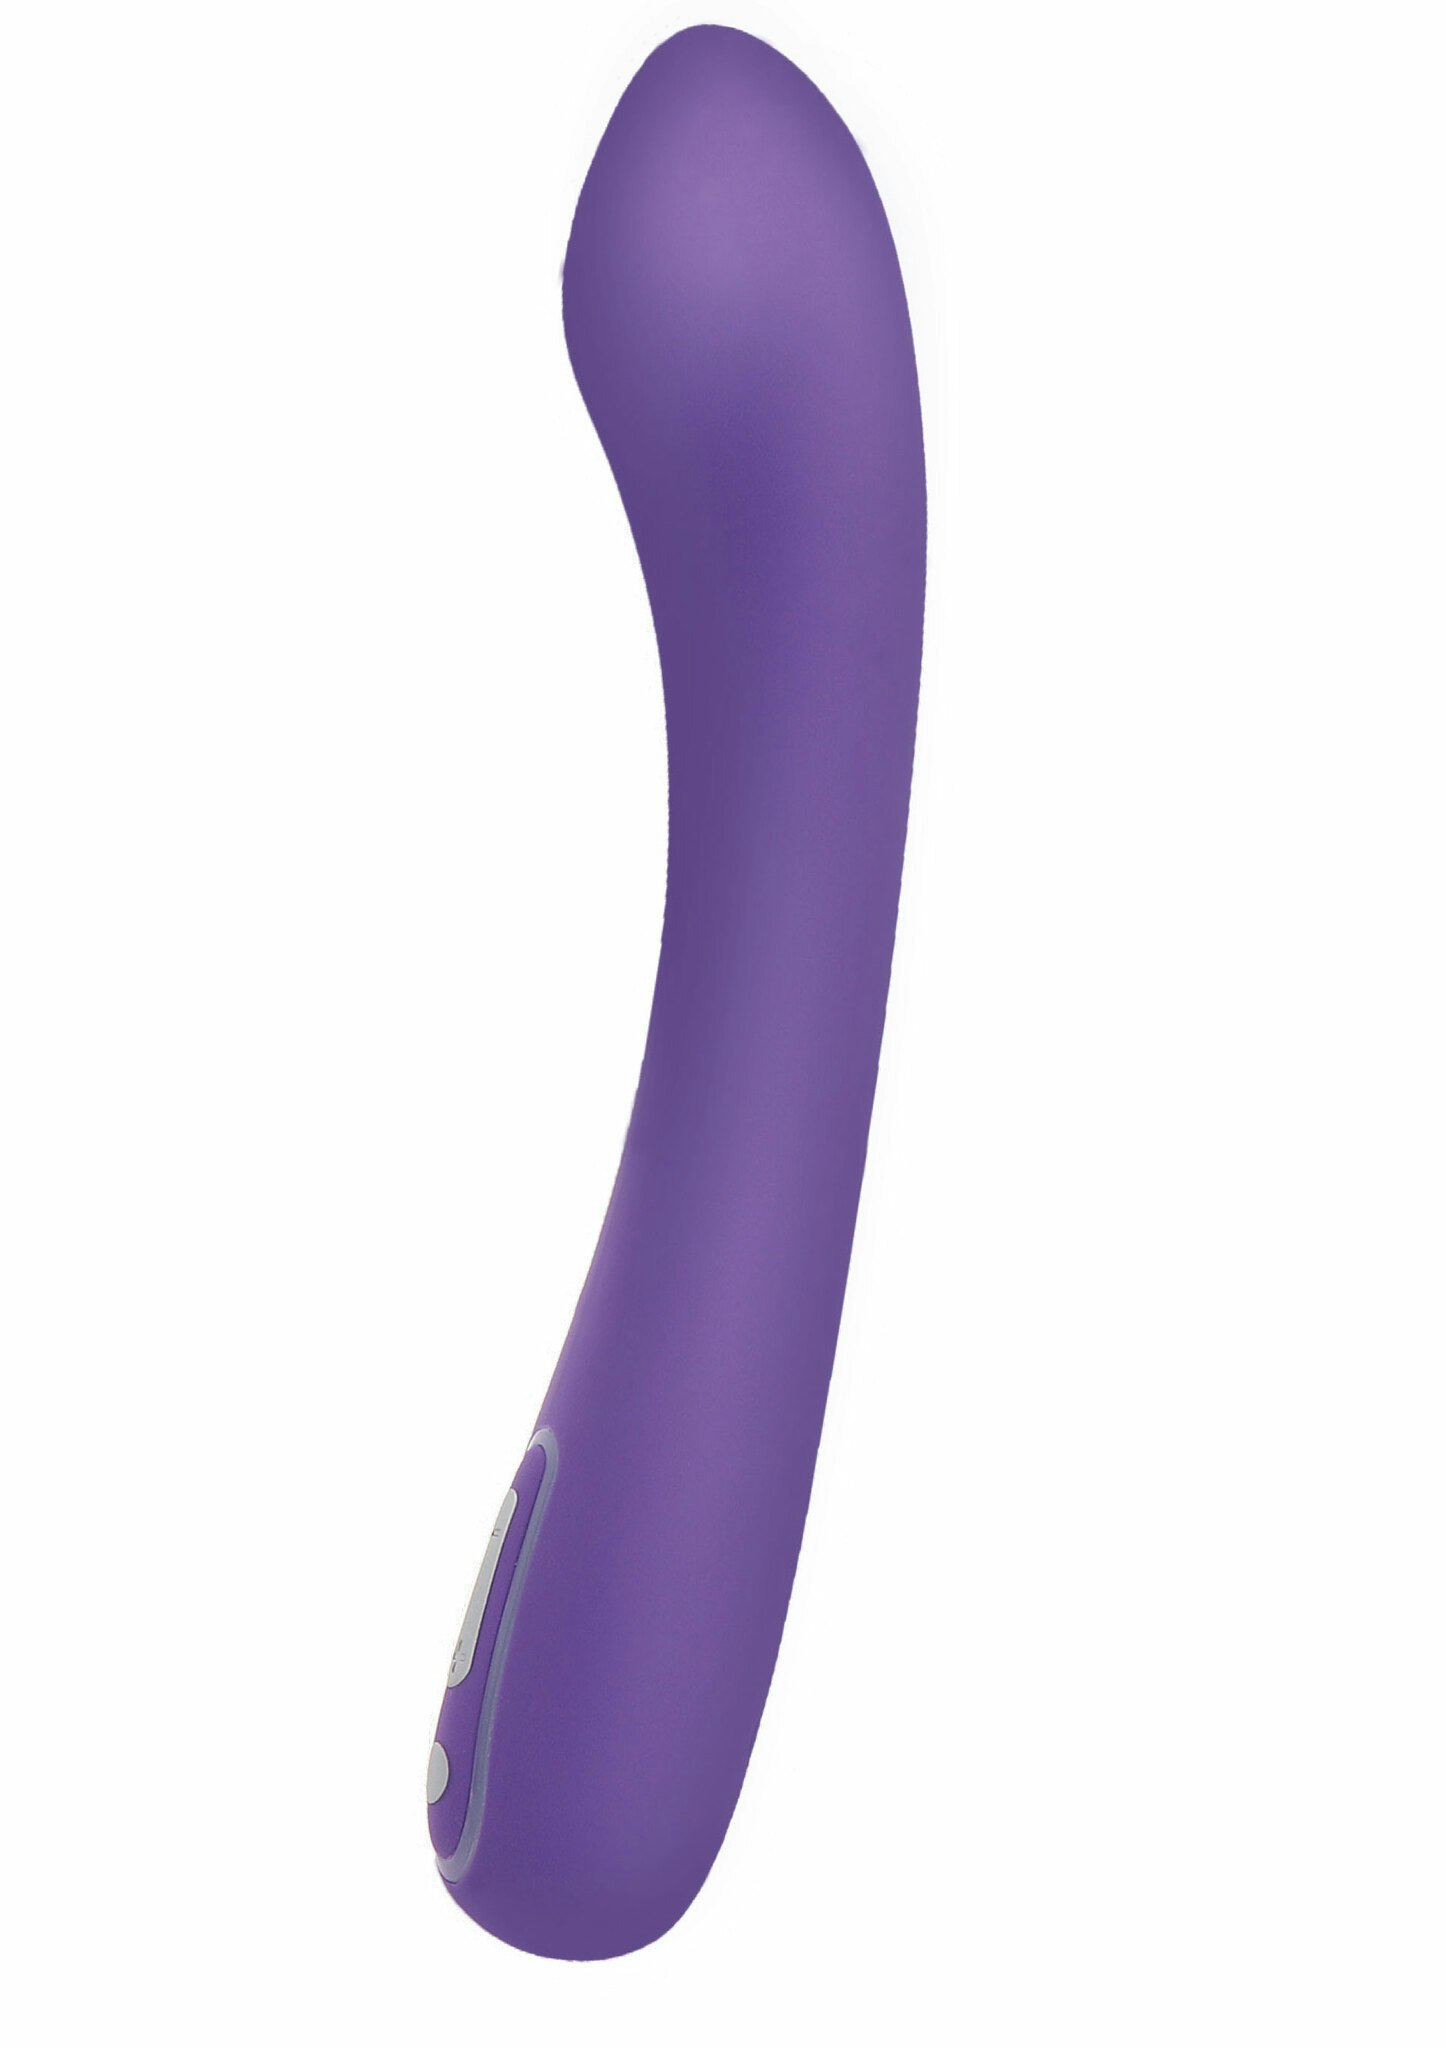 Awesome G-punkt vibrator